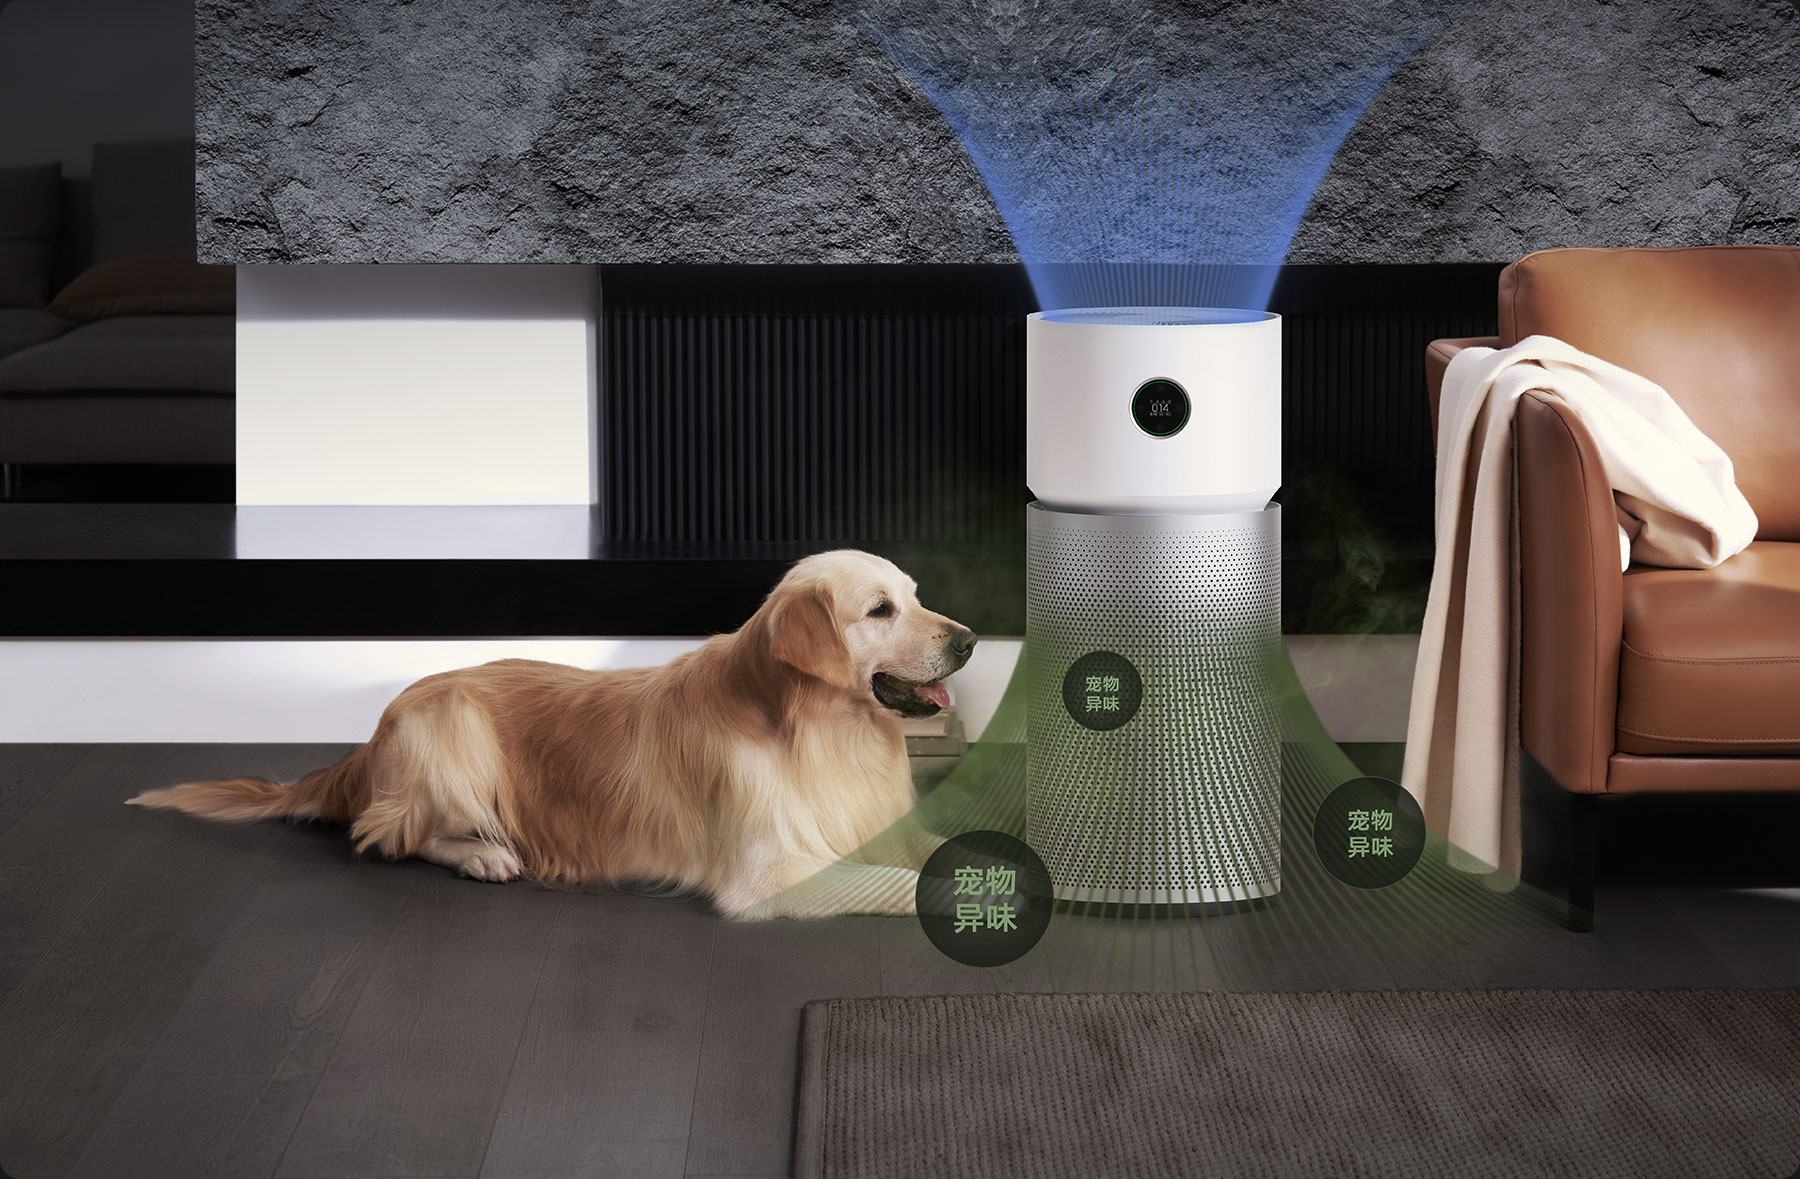  The Xiaomi Smart Air Purifier Elite is an air purifier that removes pet hair, dander, and odors from the air in a living room.